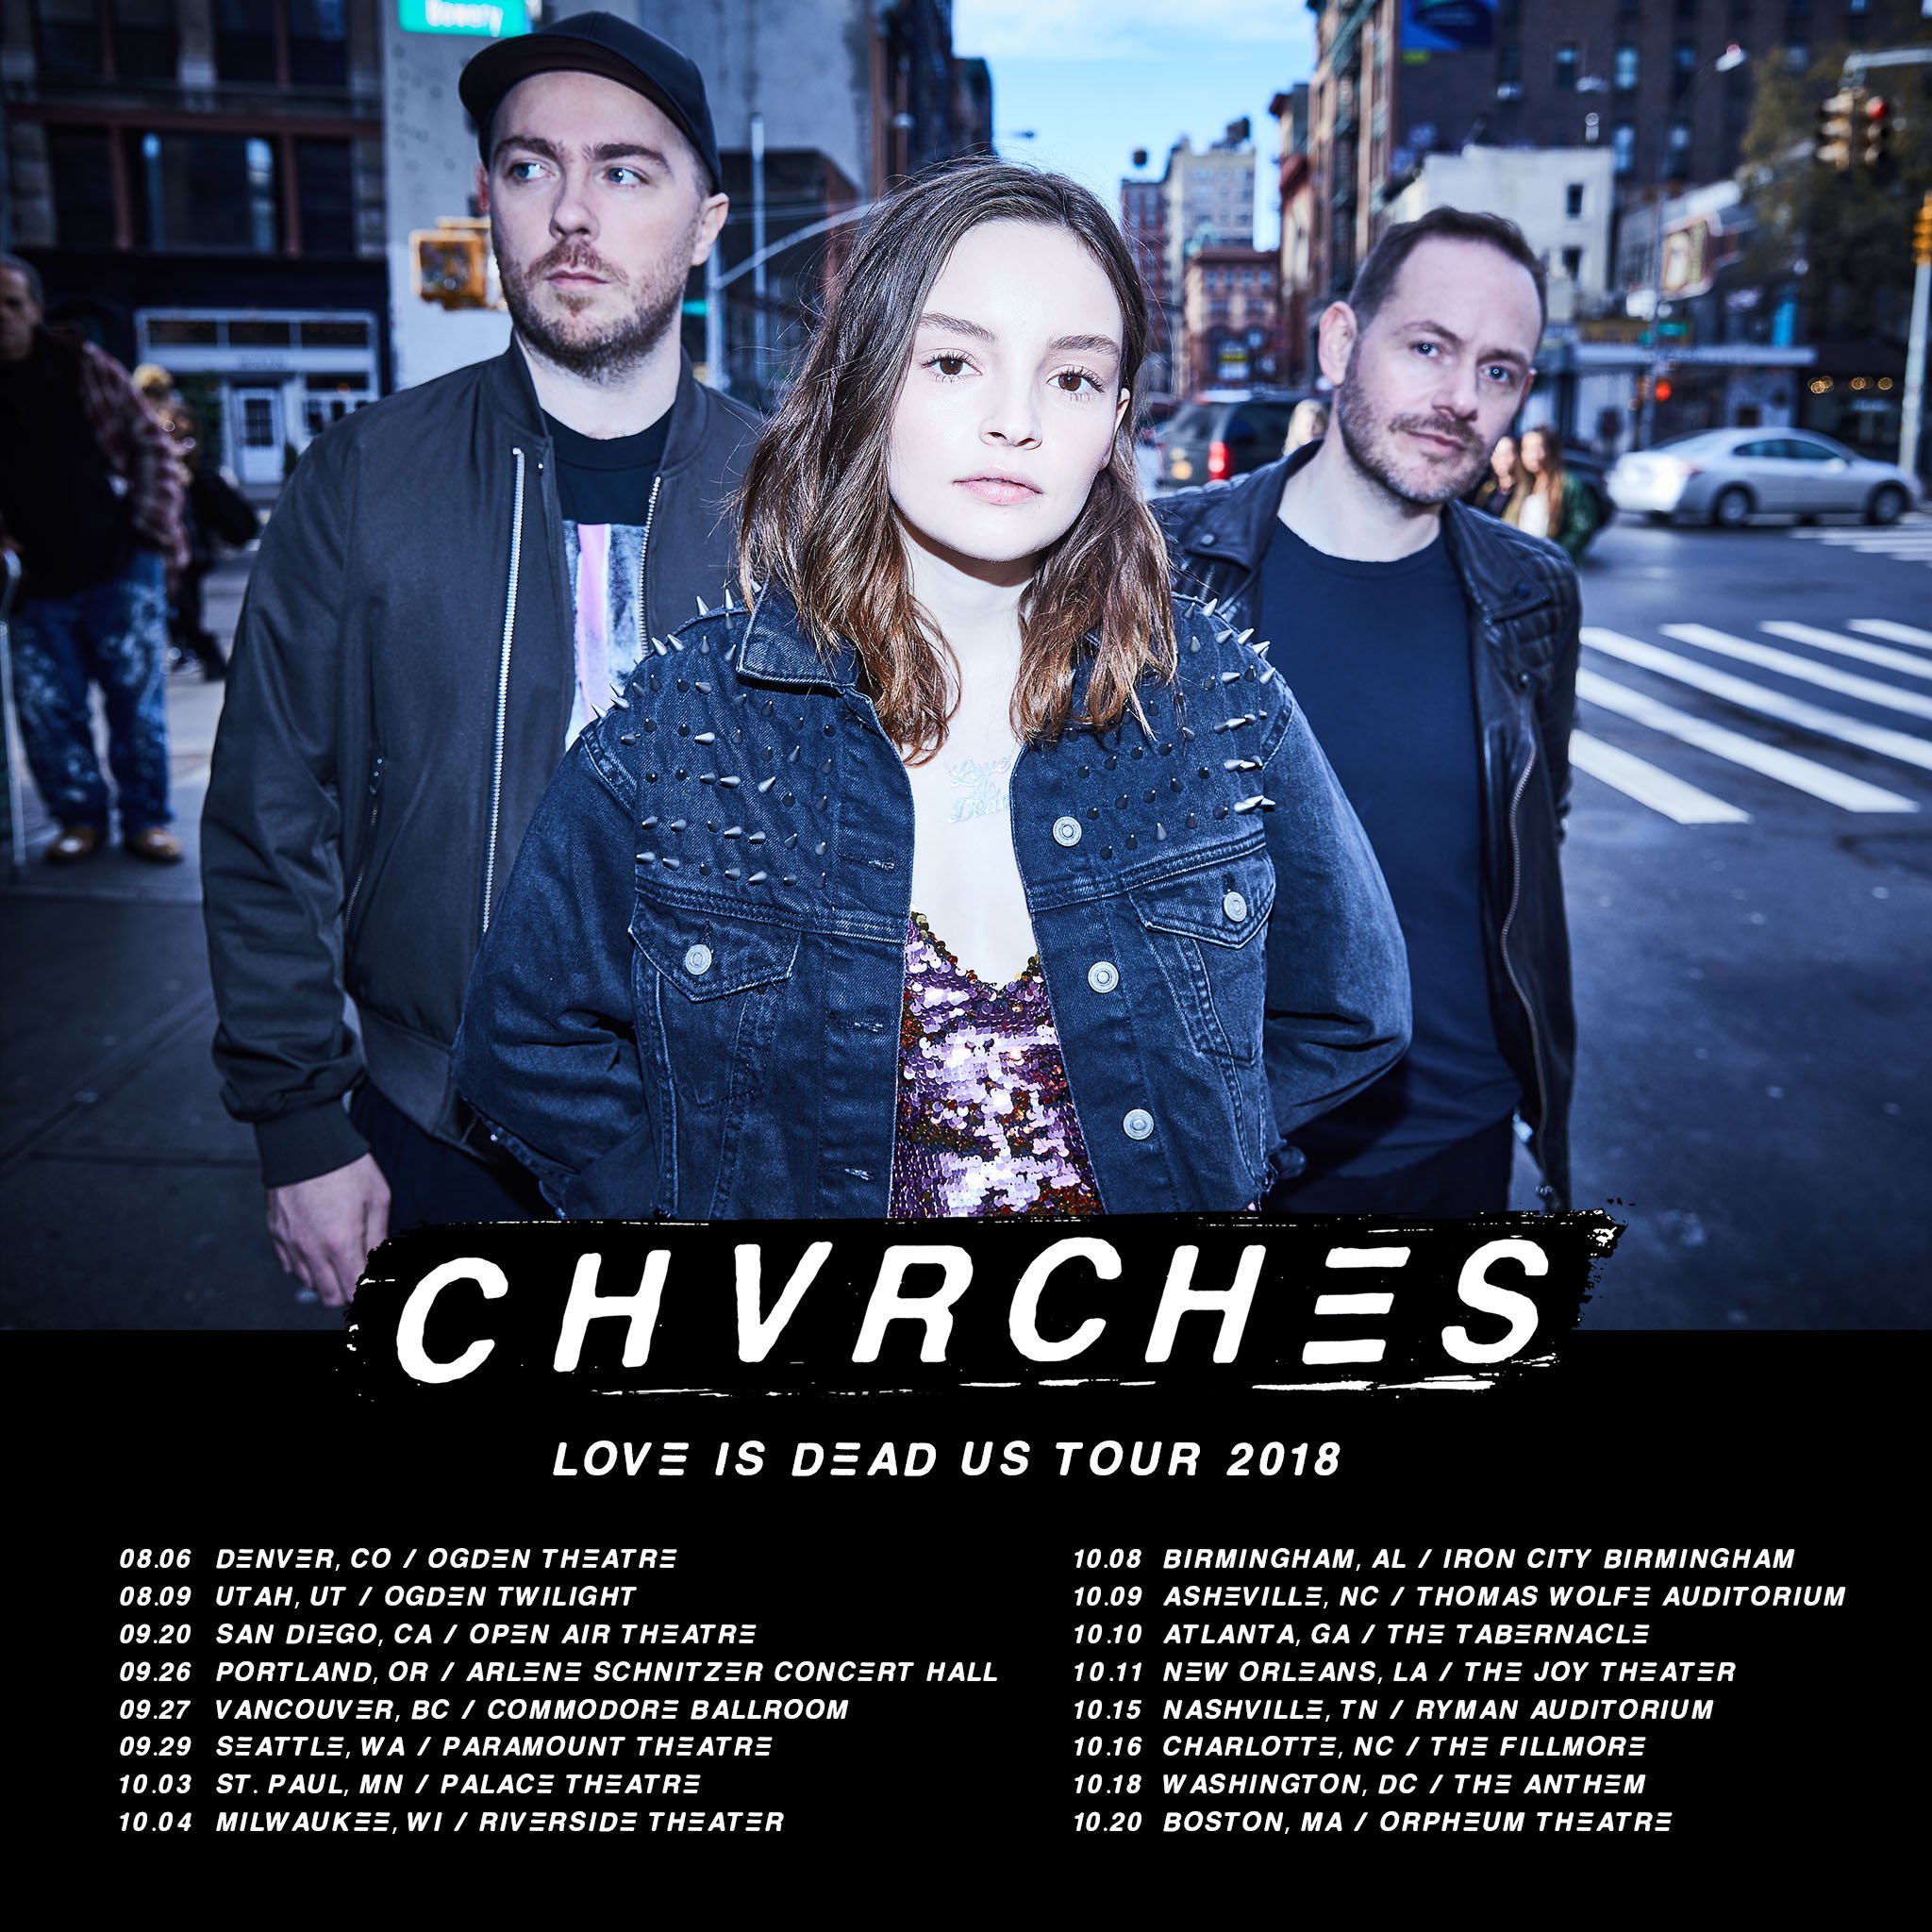 CHVRCHΞS on Twitter "Love Is Dead US Tour on sale Friday, 4/27 at 10AM